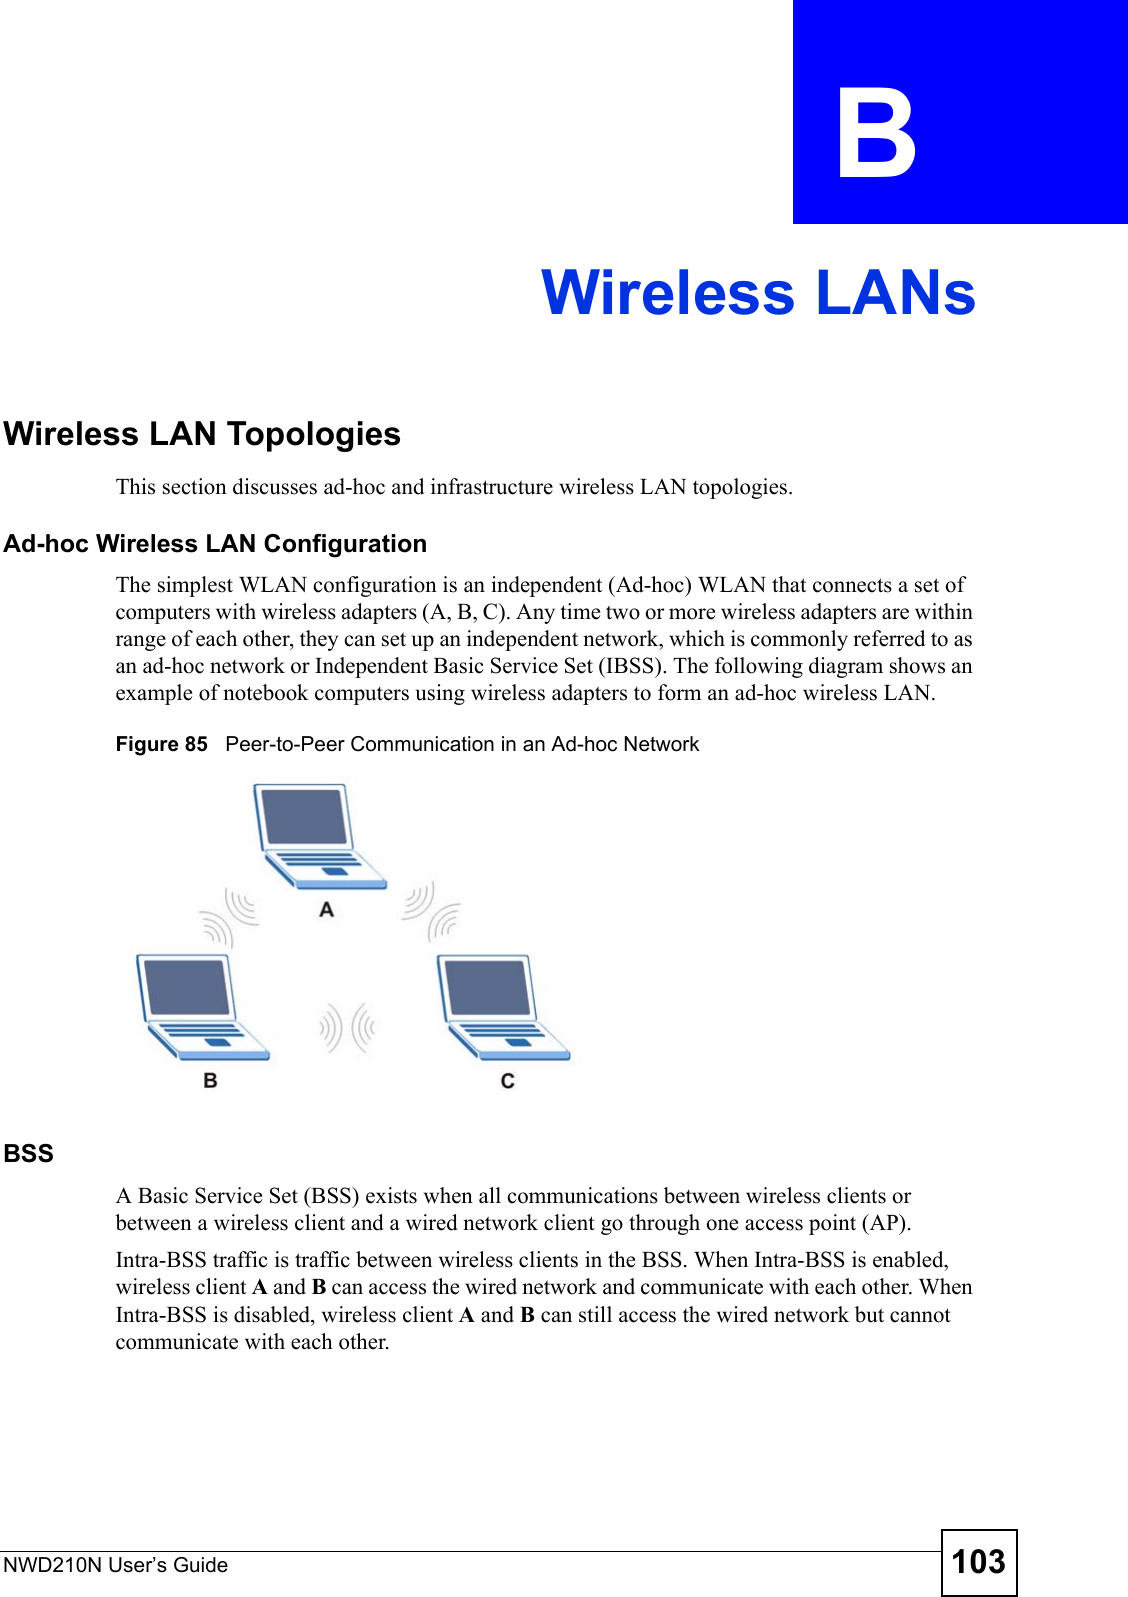 NWD210N User’s Guide 103APPENDIX  B Wireless LANsWireless LAN TopologiesThis section discusses ad-hoc and infrastructure wireless LAN topologies.Ad-hoc Wireless LAN ConfigurationThe simplest WLAN configuration is an independent (Ad-hoc) WLAN that connects a set of computers with wireless adapters (A, B, C). Any time two or more wireless adapters are within range of each other, they can set up an independent network, which is commonly referred to as an ad-hoc network or Independent Basic Service Set (IBSS). The following diagram shows an example of notebook computers using wireless adapters to form an ad-hoc wireless LAN. Figure 85   Peer-to-Peer Communication in an Ad-hoc NetworkBSSA Basic Service Set (BSS) exists when all communications between wireless clients or between a wireless client and a wired network client go through one access point (AP). Intra-BSS traffic is traffic between wireless clients in the BSS. When Intra-BSS is enabled, wireless client A and B can access the wired network and communicate with each other. When Intra-BSS is disabled, wireless client A and B can still access the wired network but cannot communicate with each other.